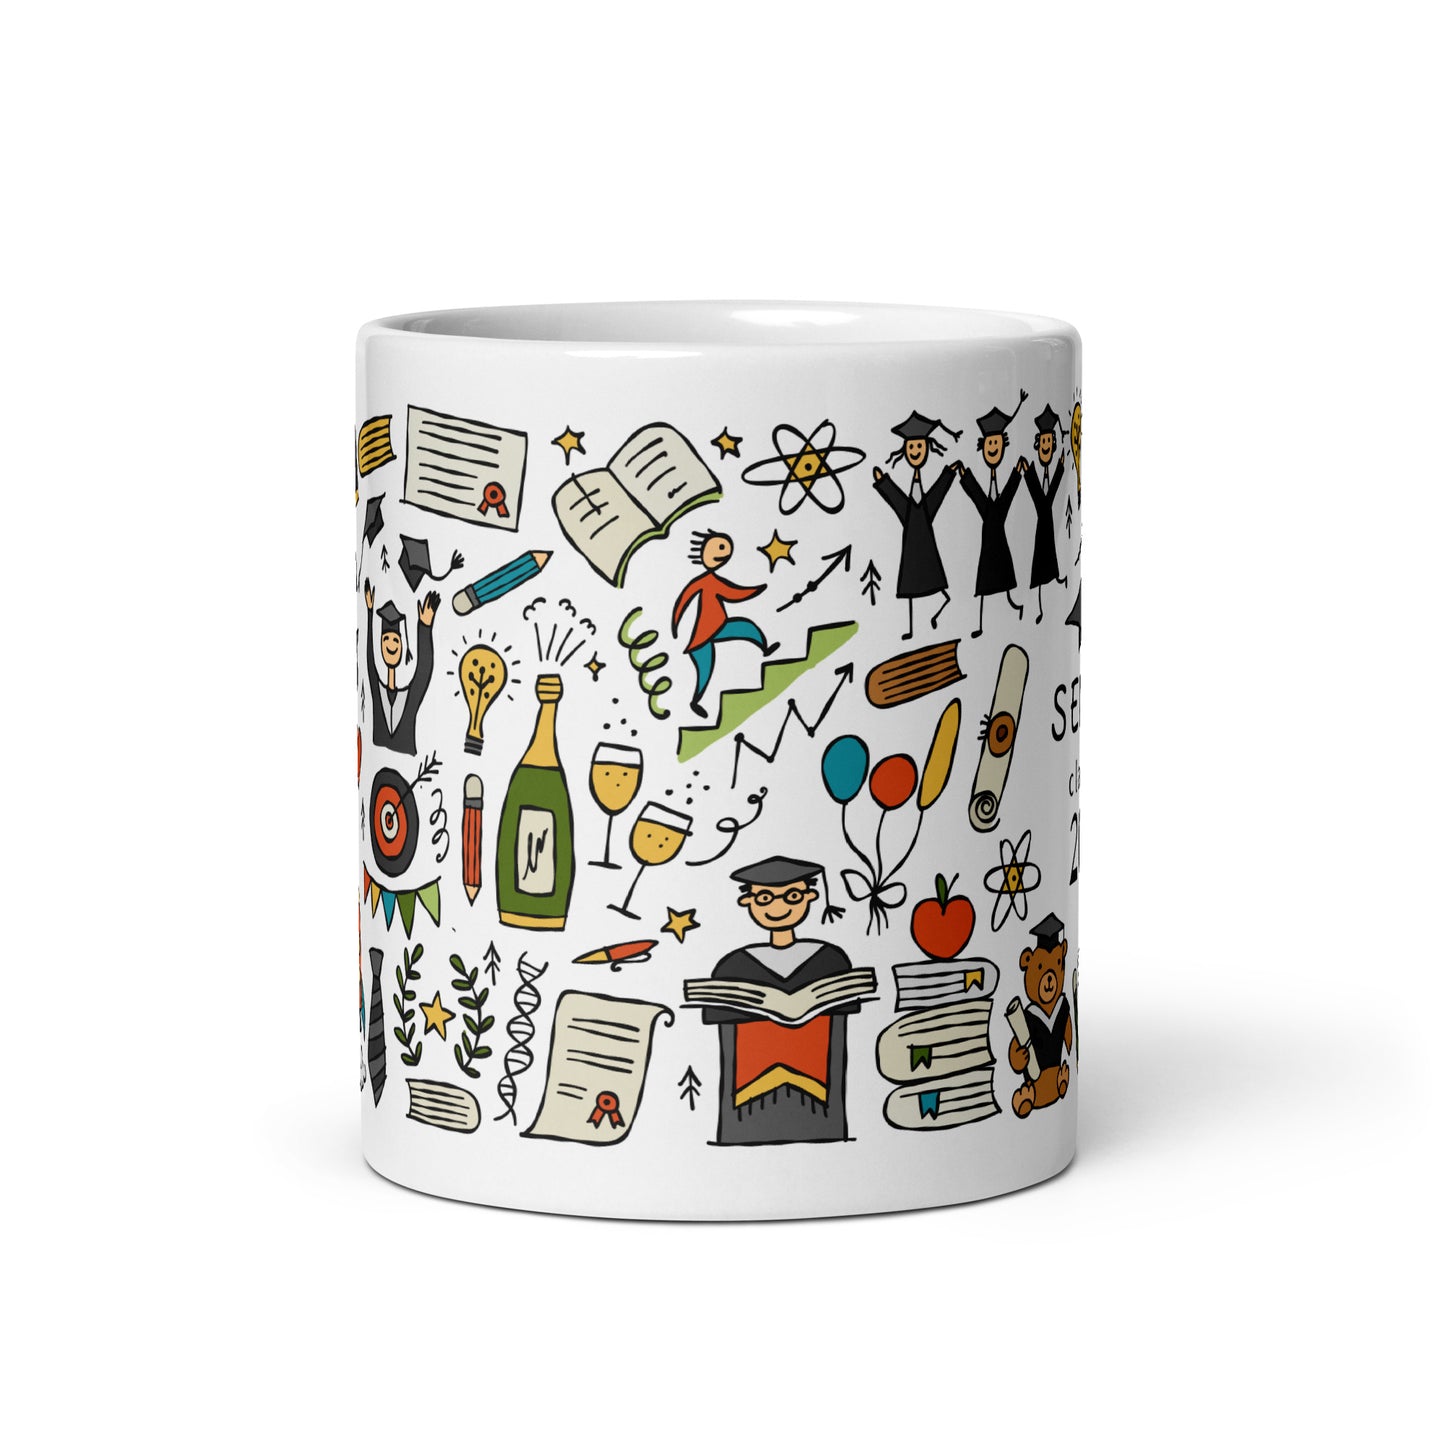 Personalised graduation mug 11oz with funny designer print featuring graduates in hats and mantles, school books and holiday motifs and graduation teddy bear